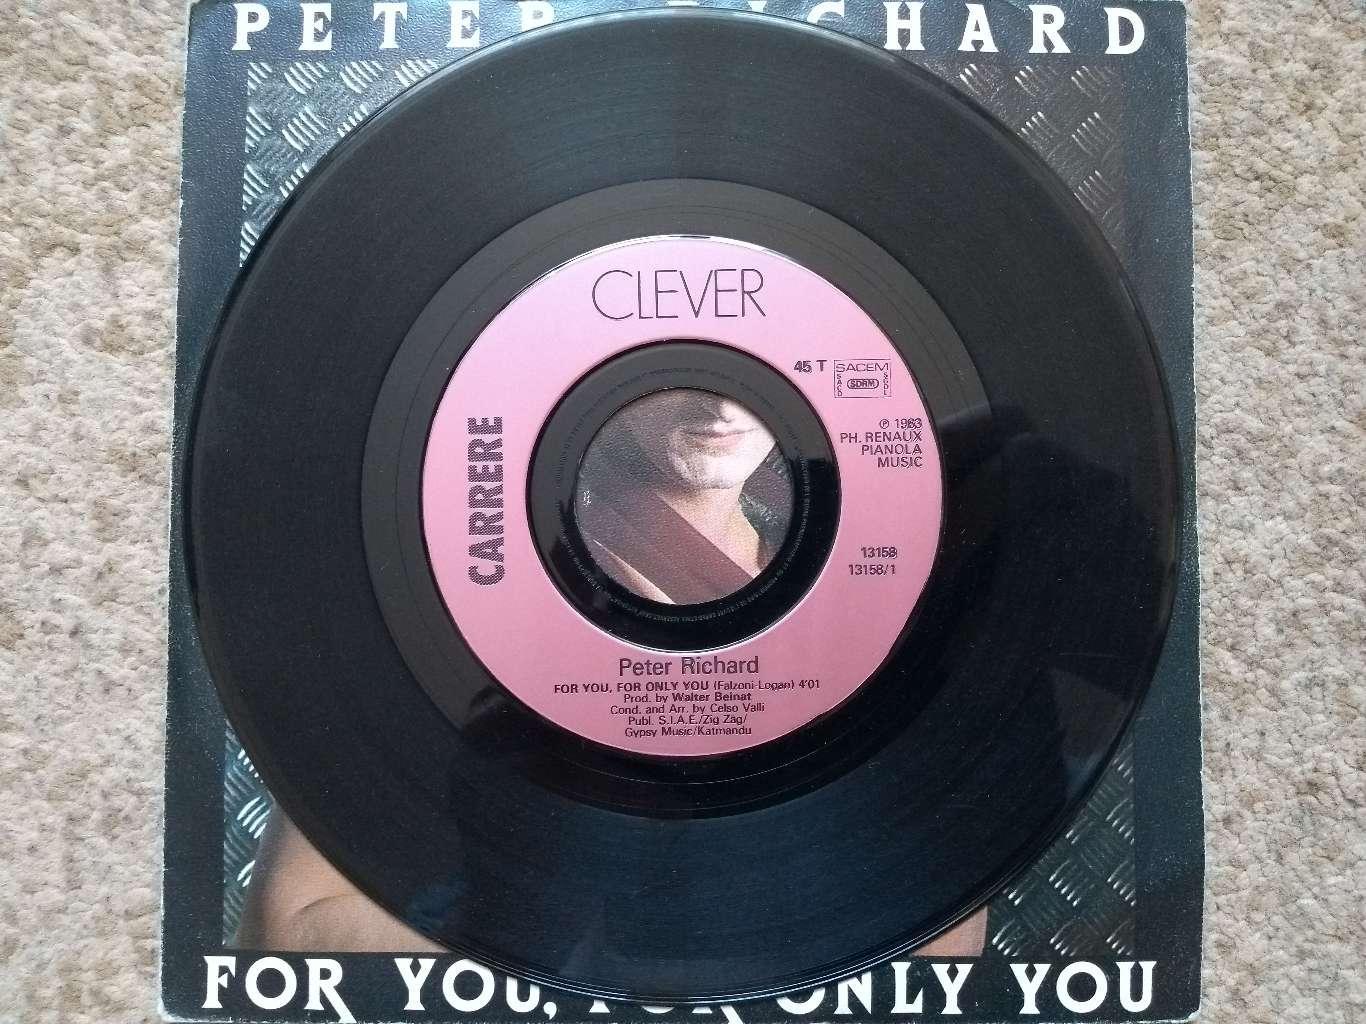 Peter Richard - Talk About Me, For you, for only you 2 Full Screen